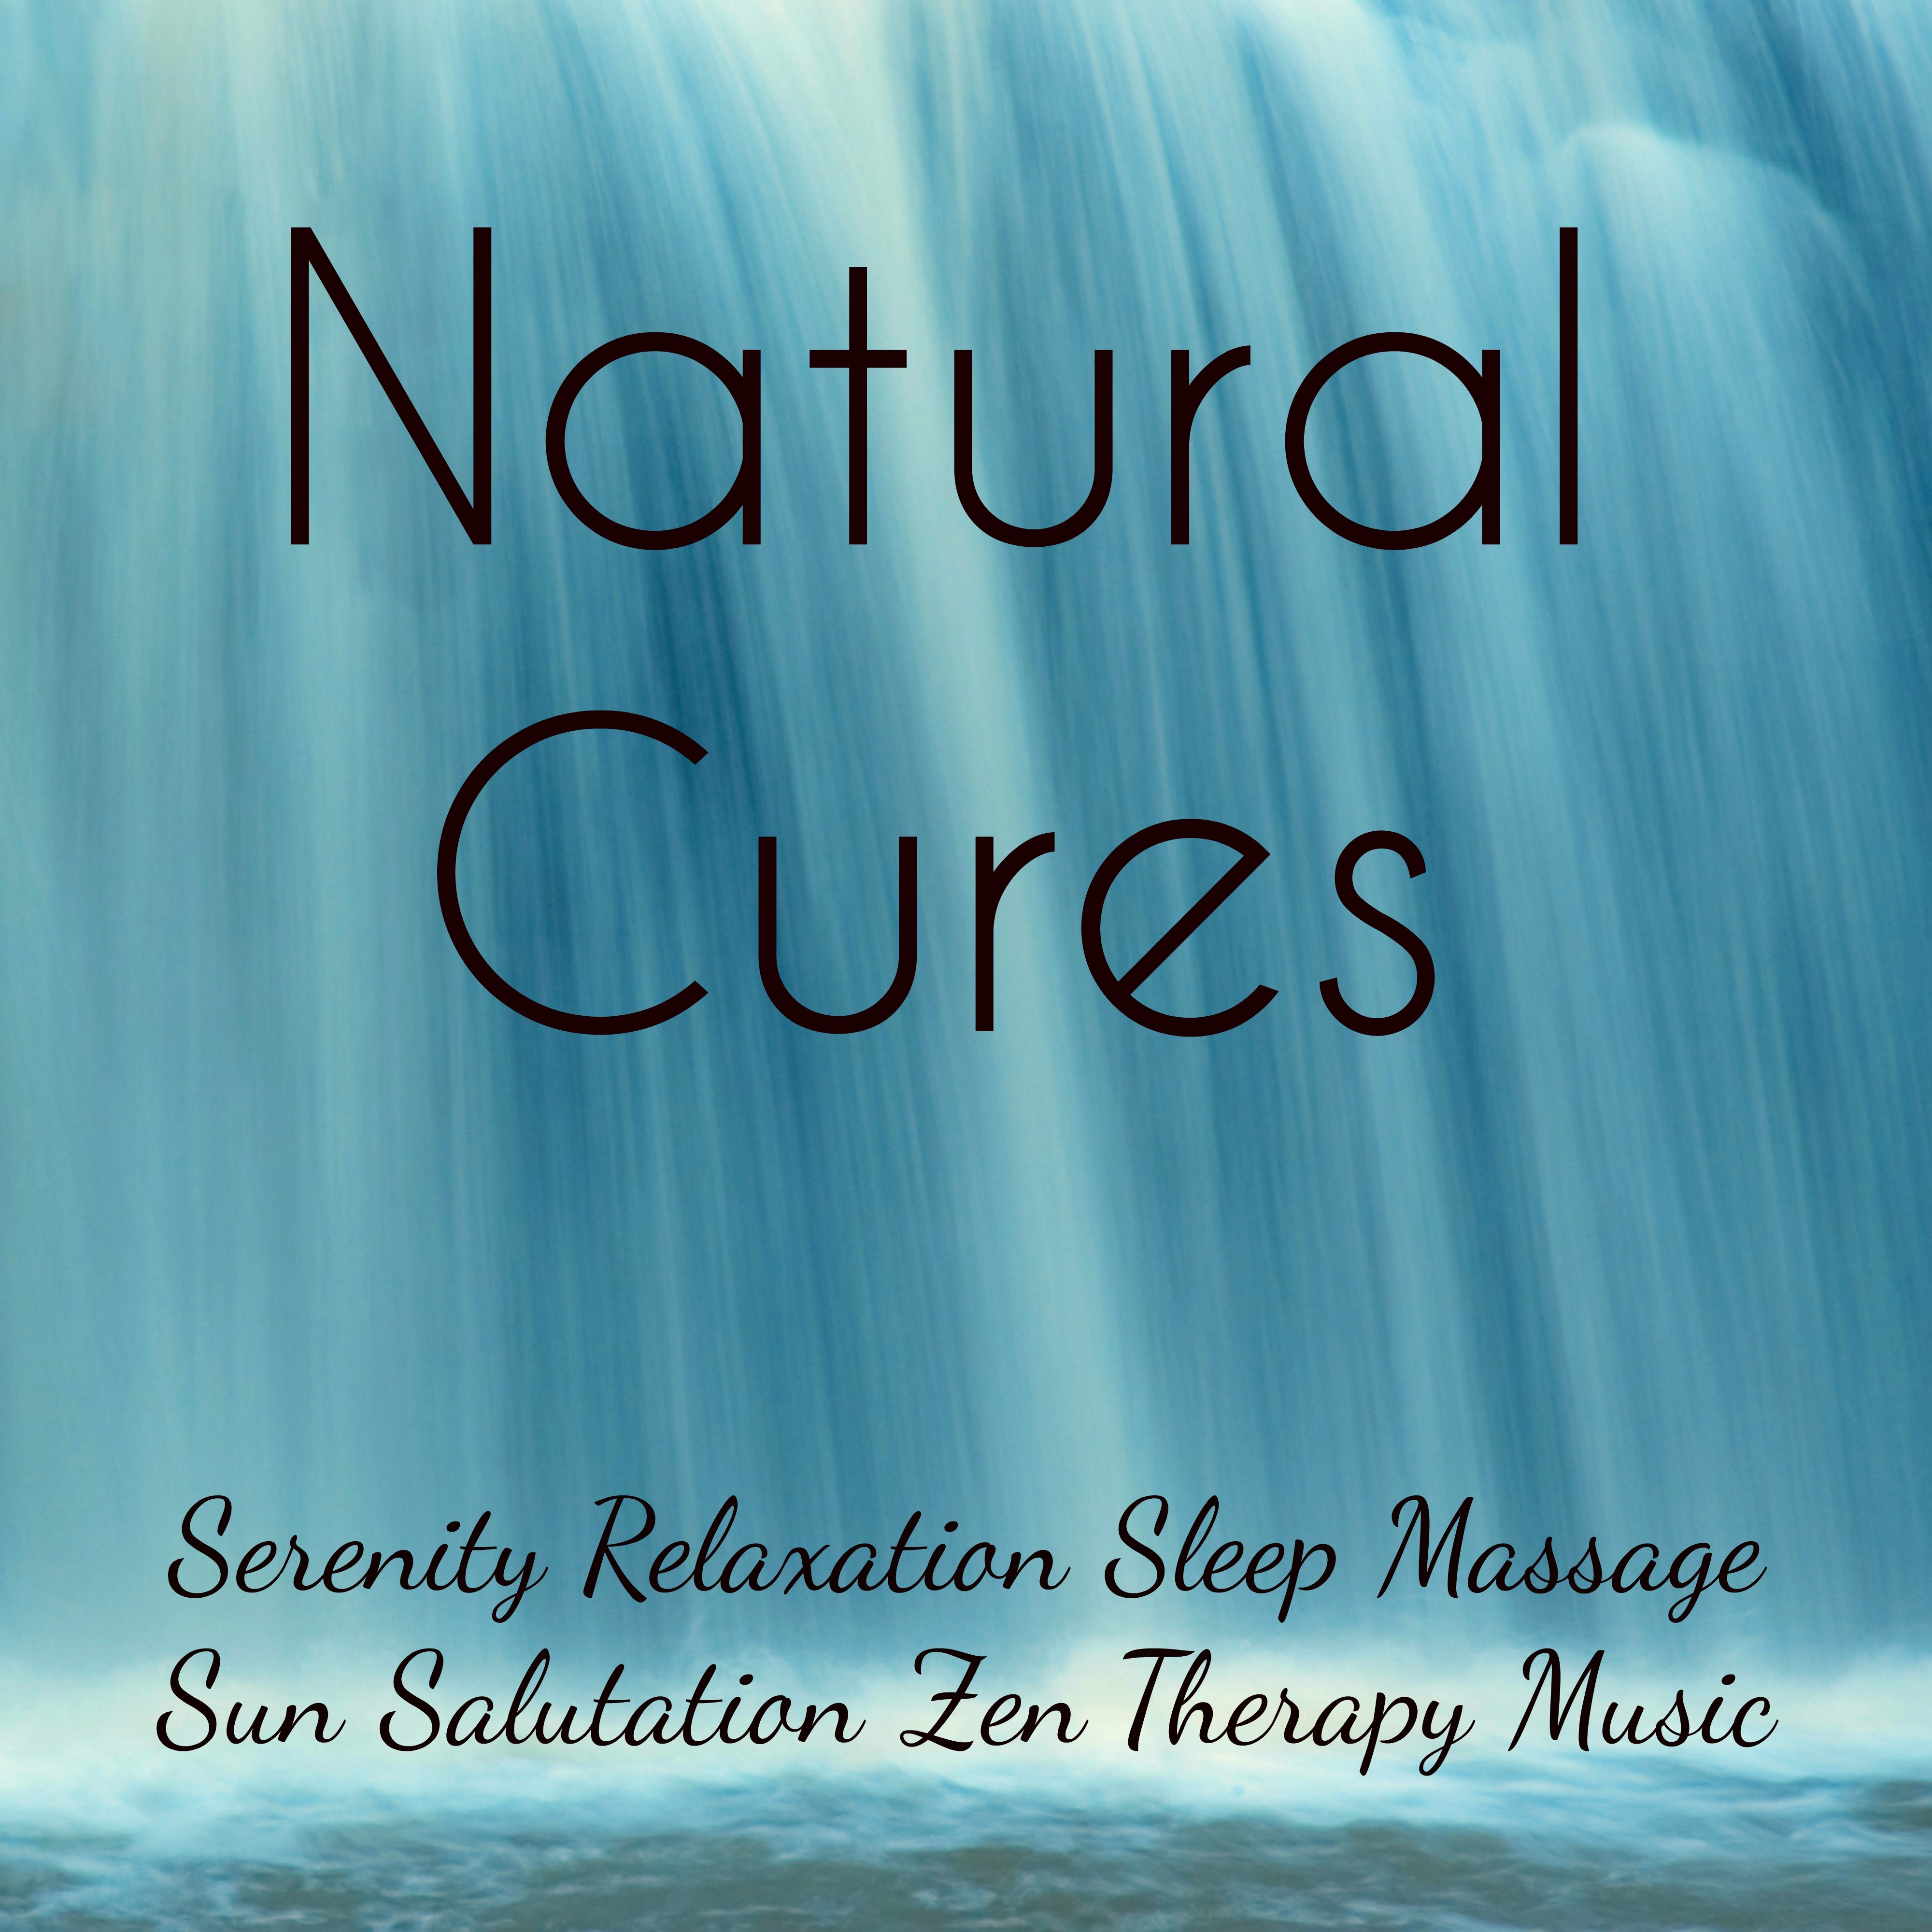 Natural Cures - Serenity Relaxation Sleep Massage Sun Salutation Zen Therapy Music with Nature Instrumental New Age Sounds